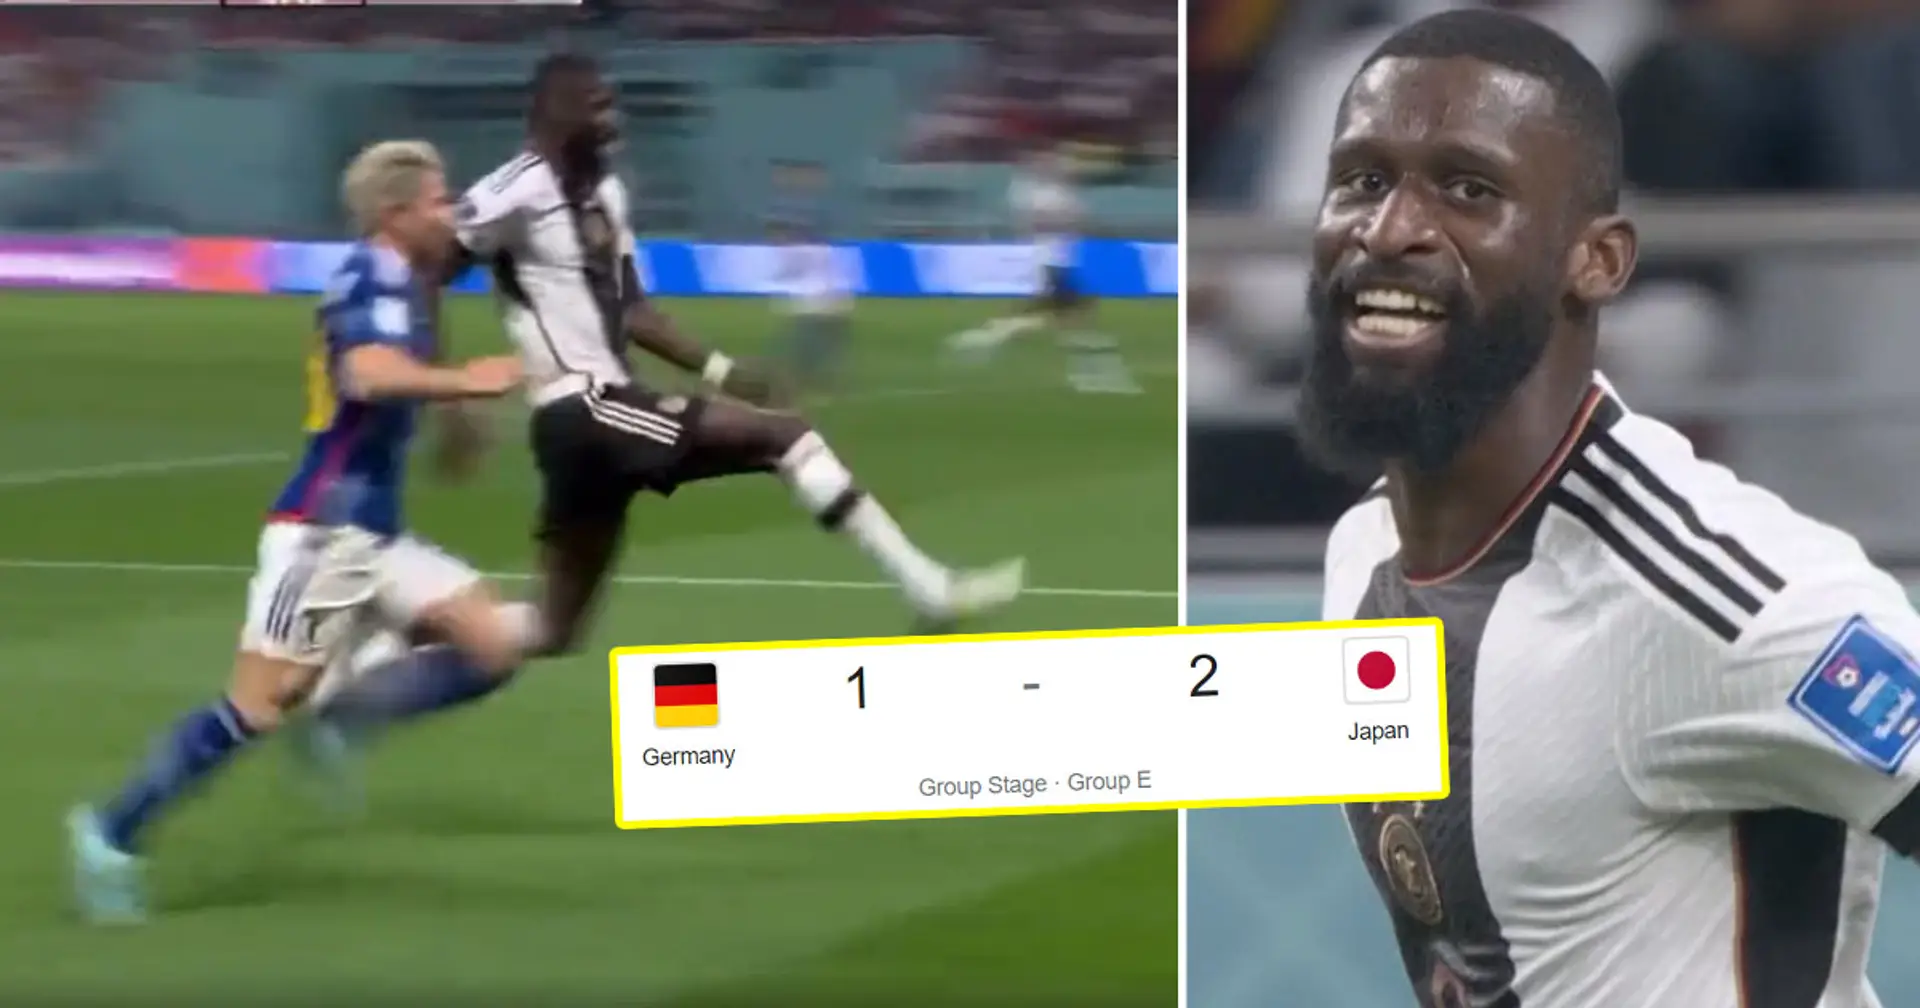 Rudiger's famous run doesn't help as Germany suffer shocking defeat to Japan